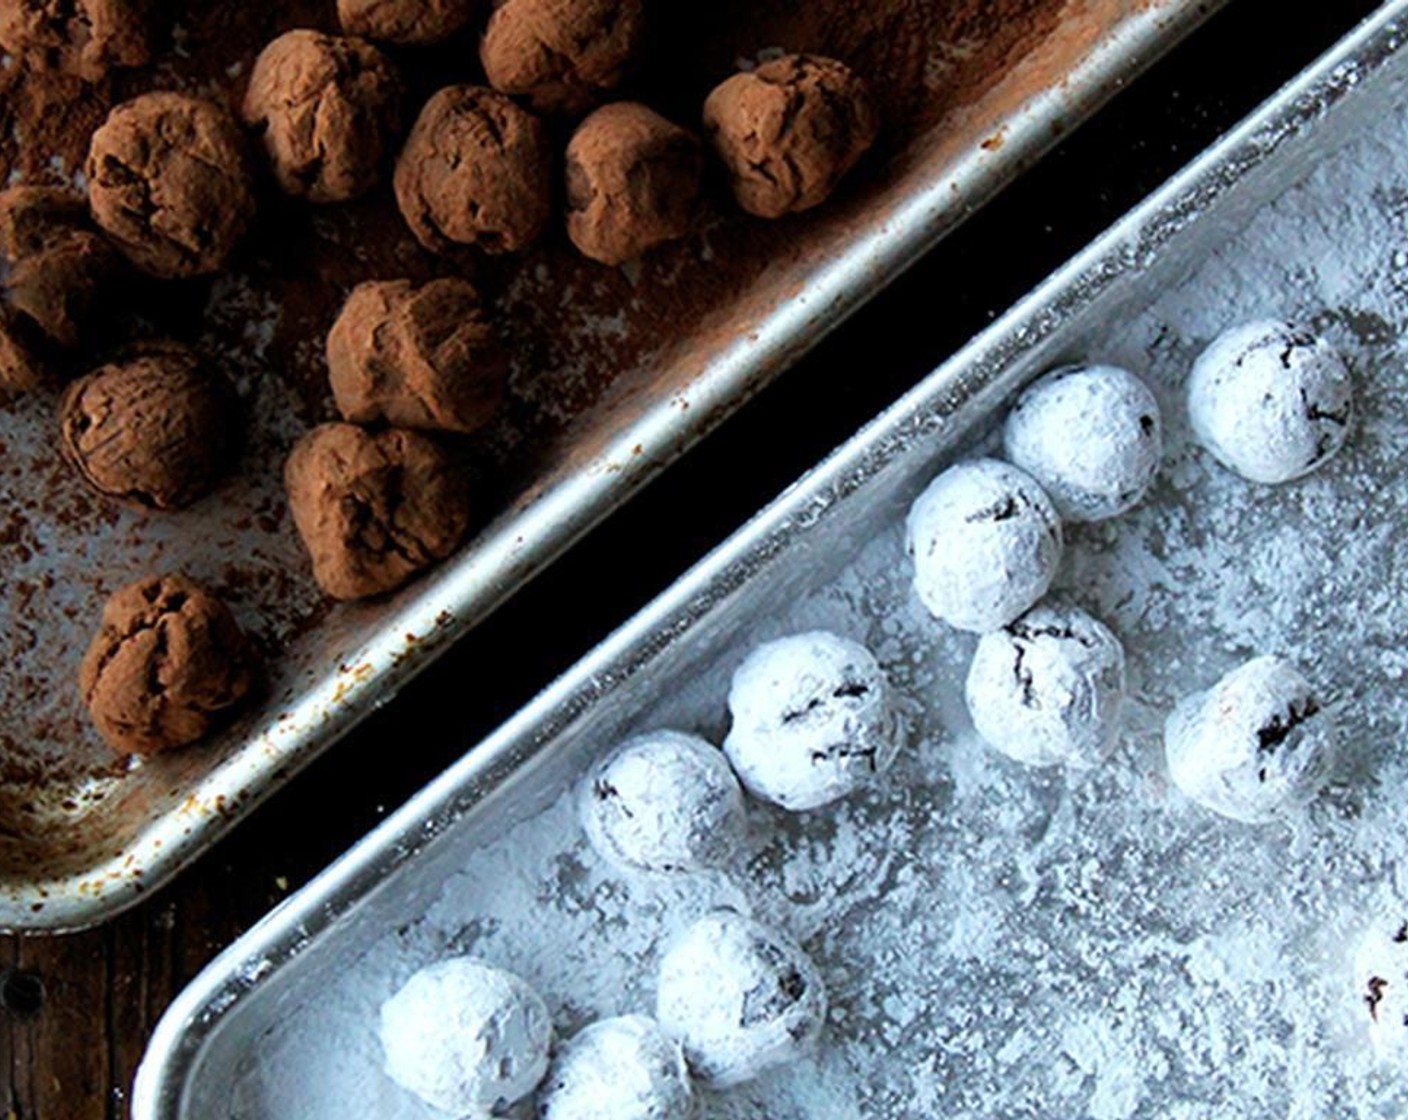 step 5 Spread some Unsweetened Cocoa Powder (to taste) into a shallow dish, preferably one with sides, If using Powdered Confectioners Sugar (to taste), spread it in a separate dish. Spread truffles into each vessel and shake the vessel to coat the truffles.